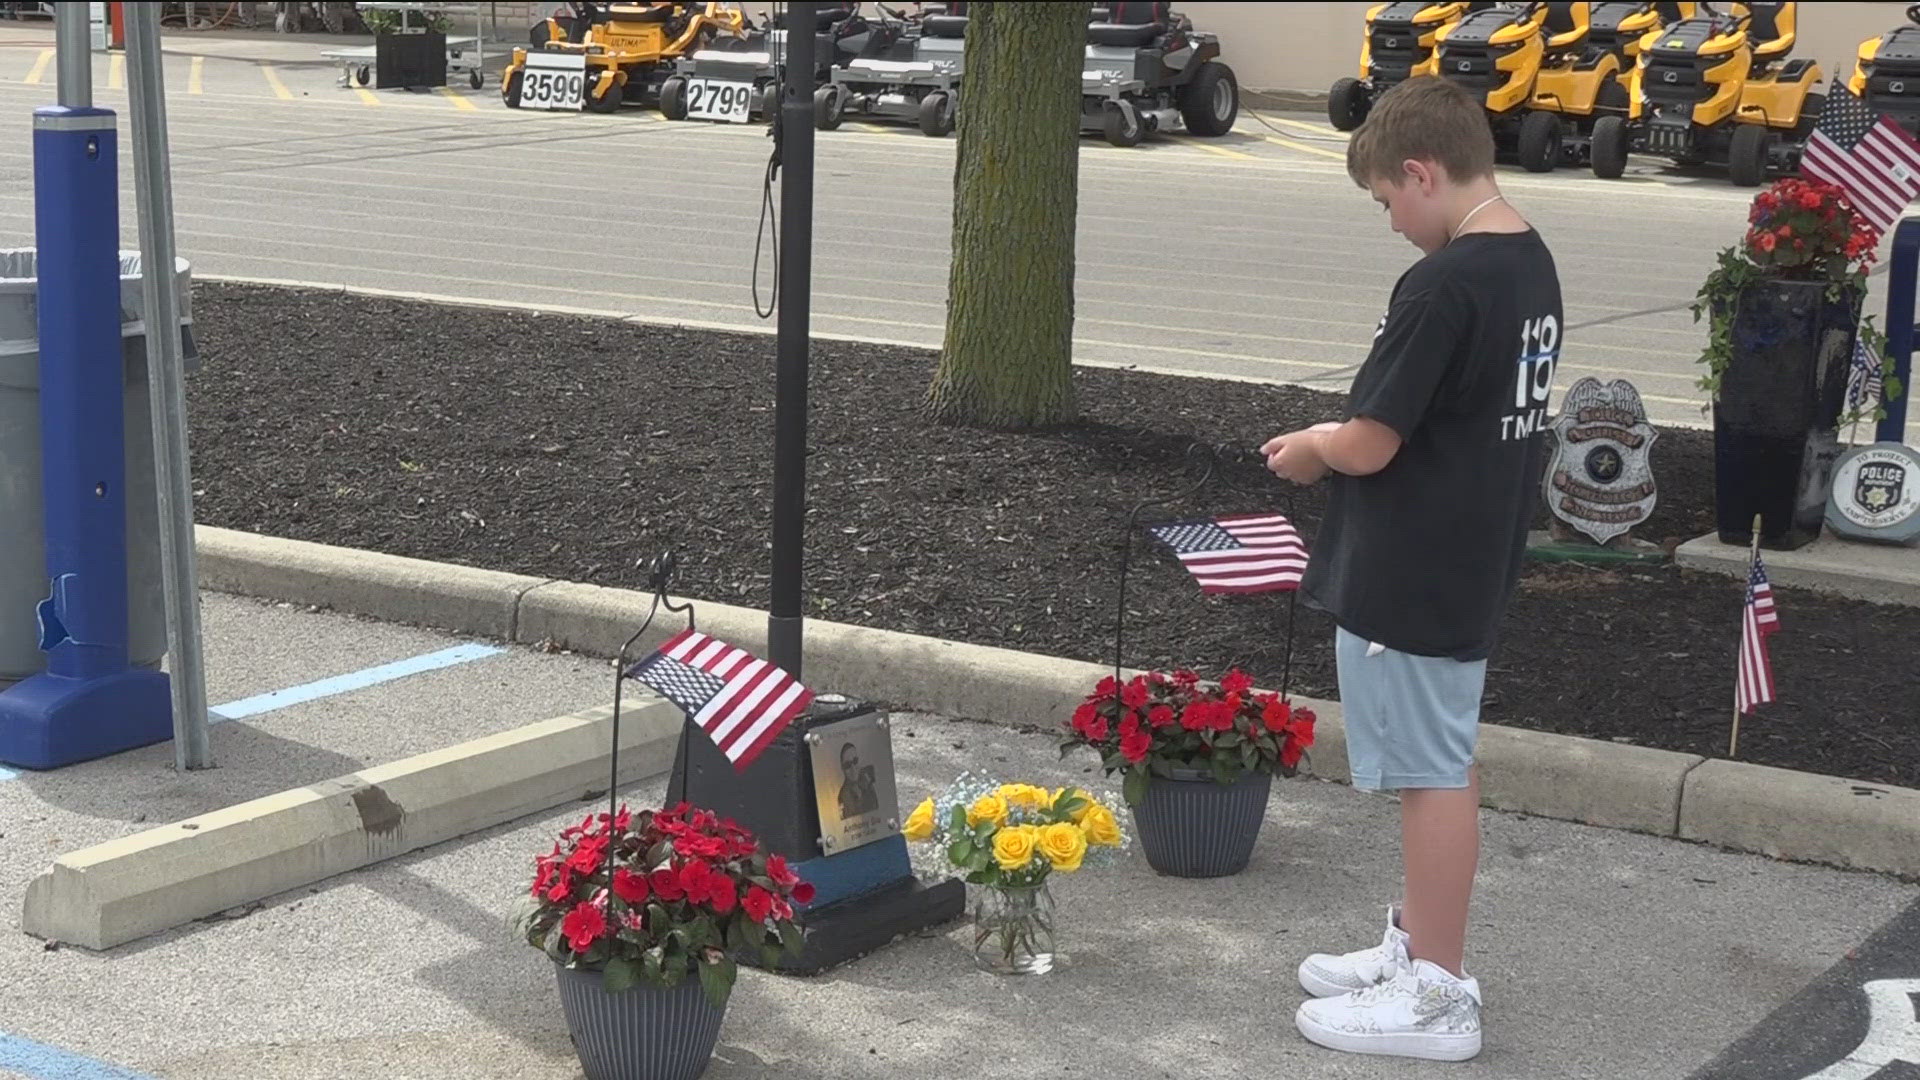 Every year on July 4, the family of Toledo Police Officer Anthony Dia gather at Home Depot where he was killed in the line of duty to remember him in their own ways.